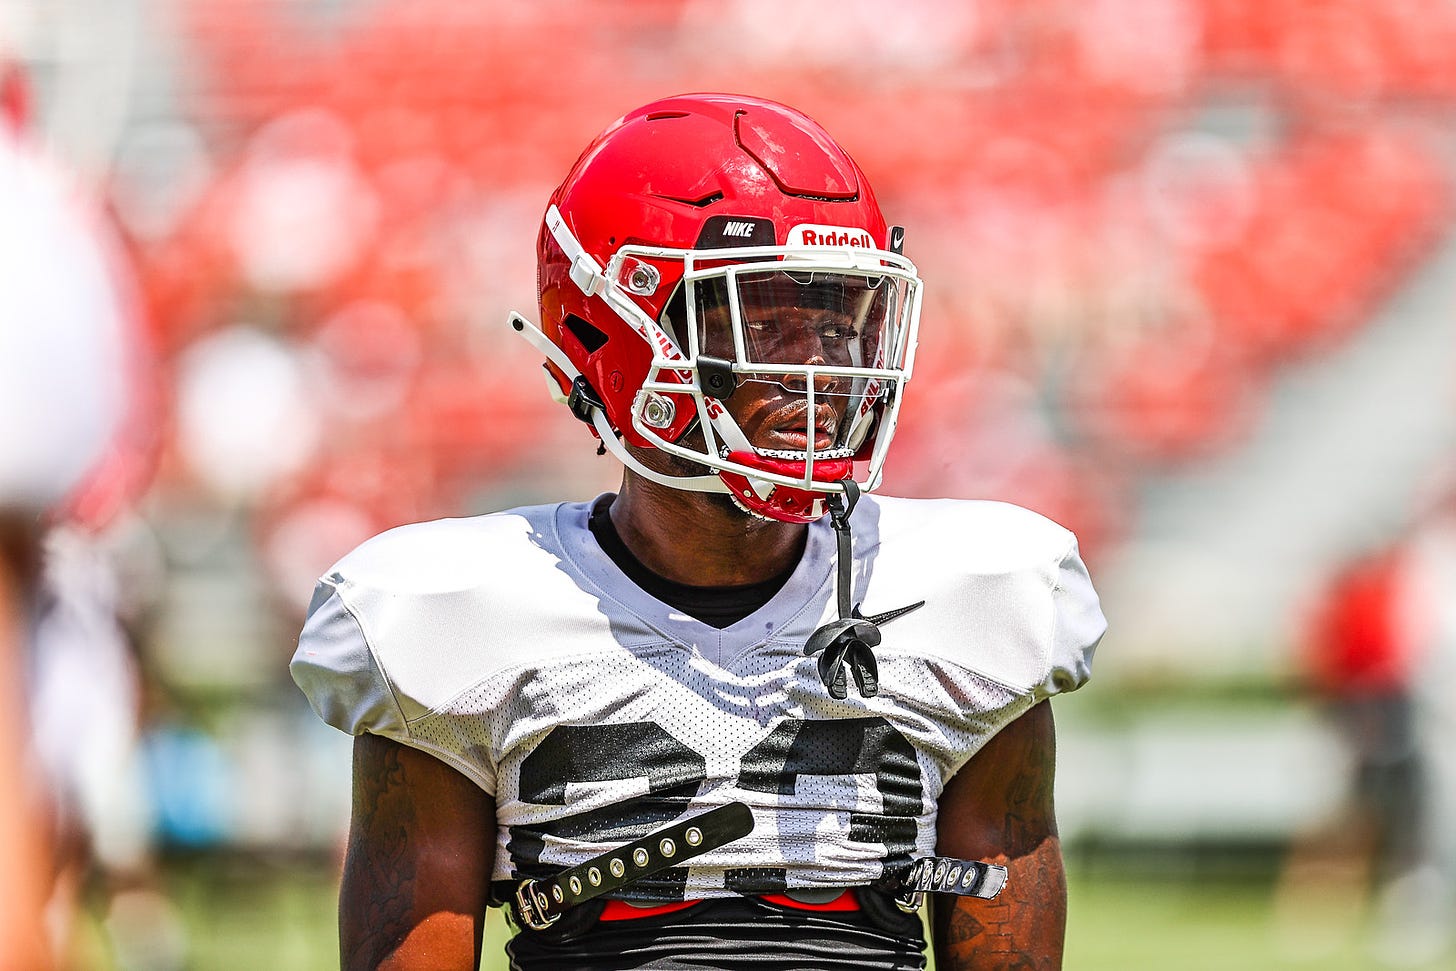 Georgia defensive back Tykee Smith (23) during the Bulldogs’ practice session on Dooley Field at Sanford Stadium in Athens, Ga., on Saturday, Aug. 14, 2021. (Photo by Tony Walsh)